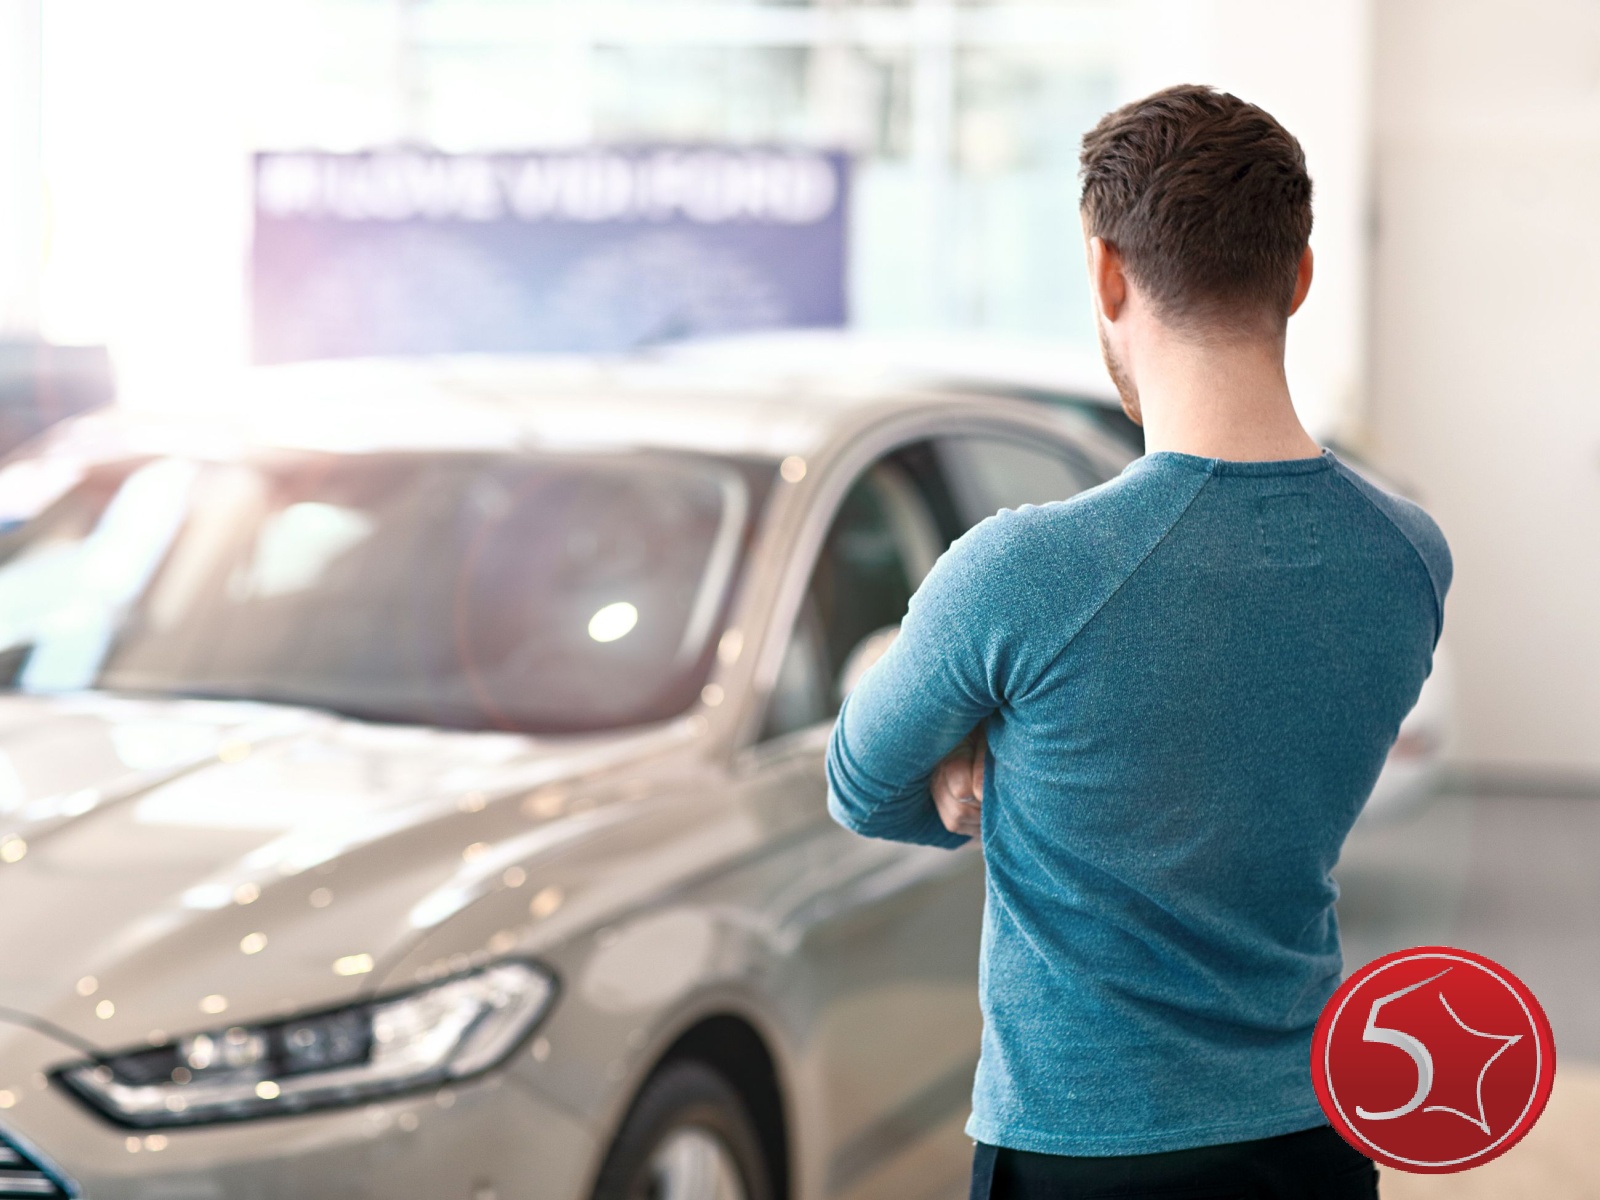 7 Questions to Ask About Shopping for Used Cars